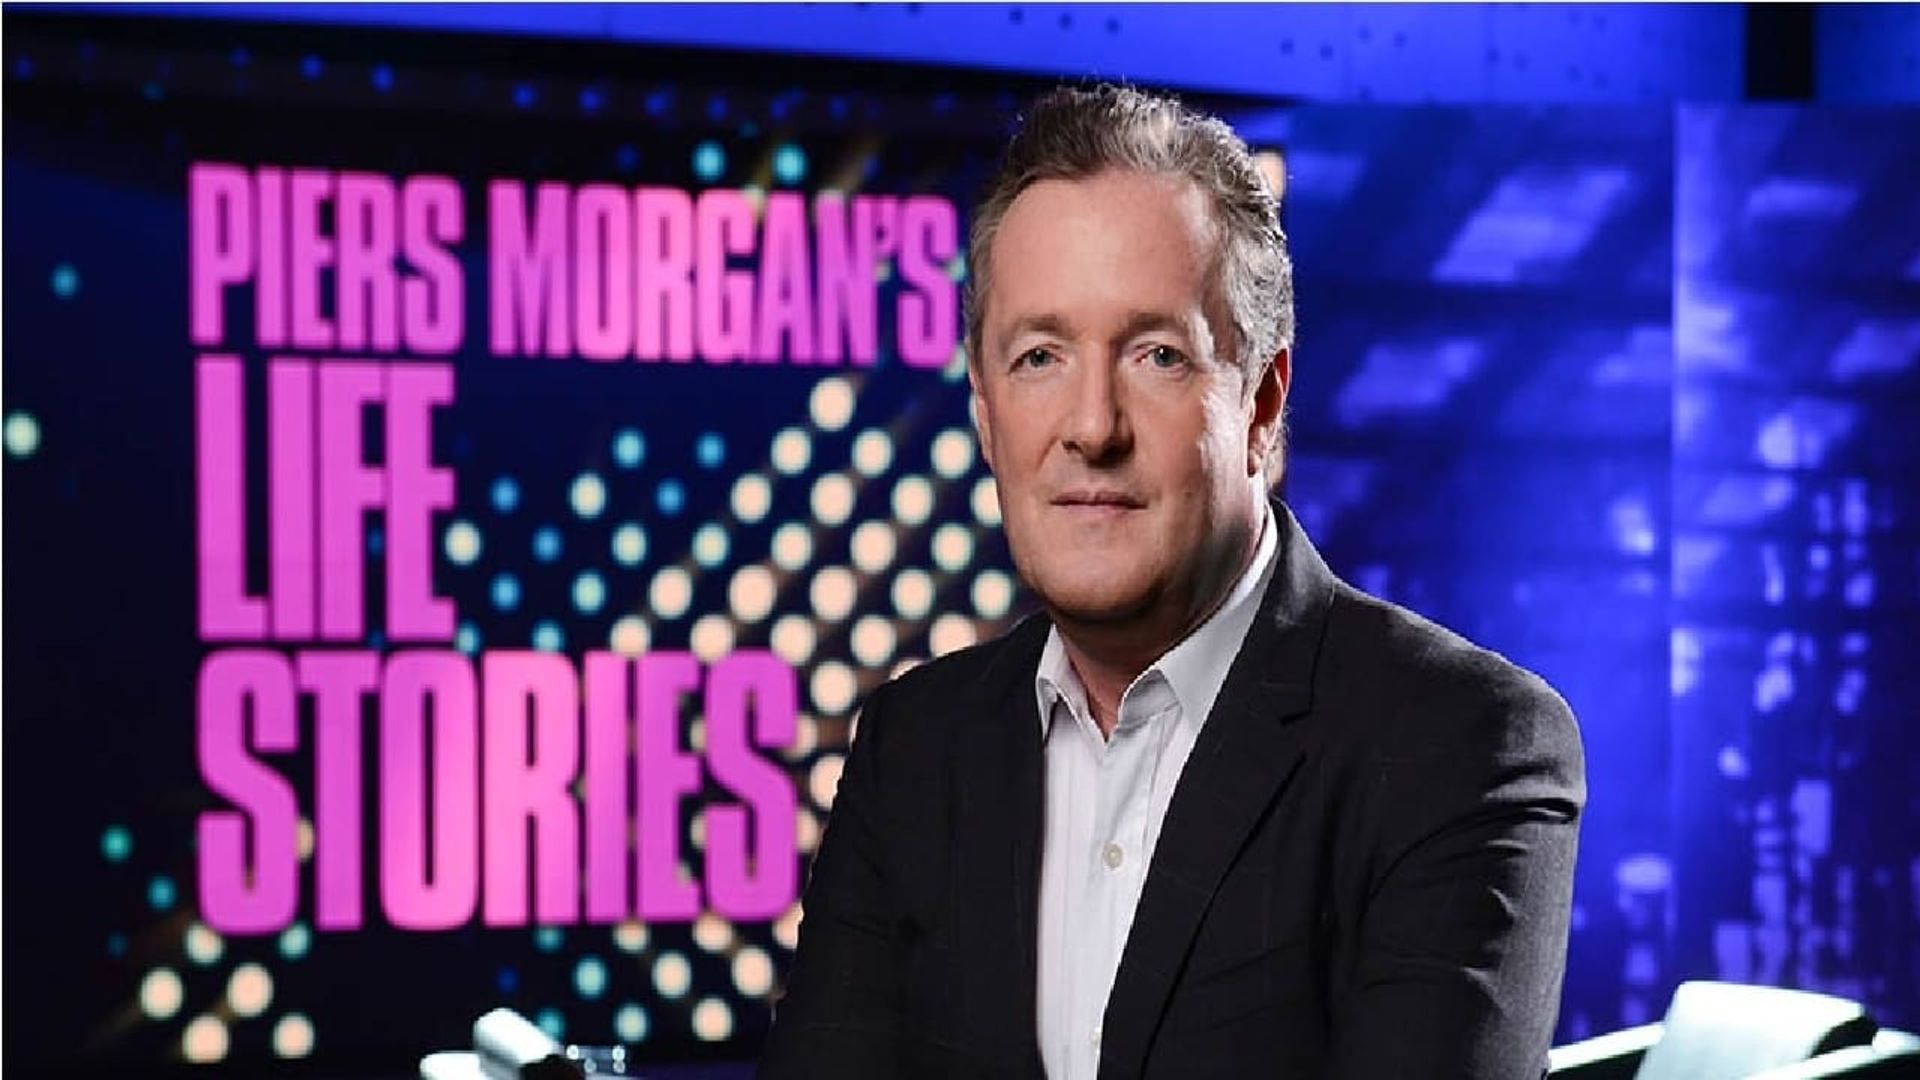 Piers Morgan's Life Stories background